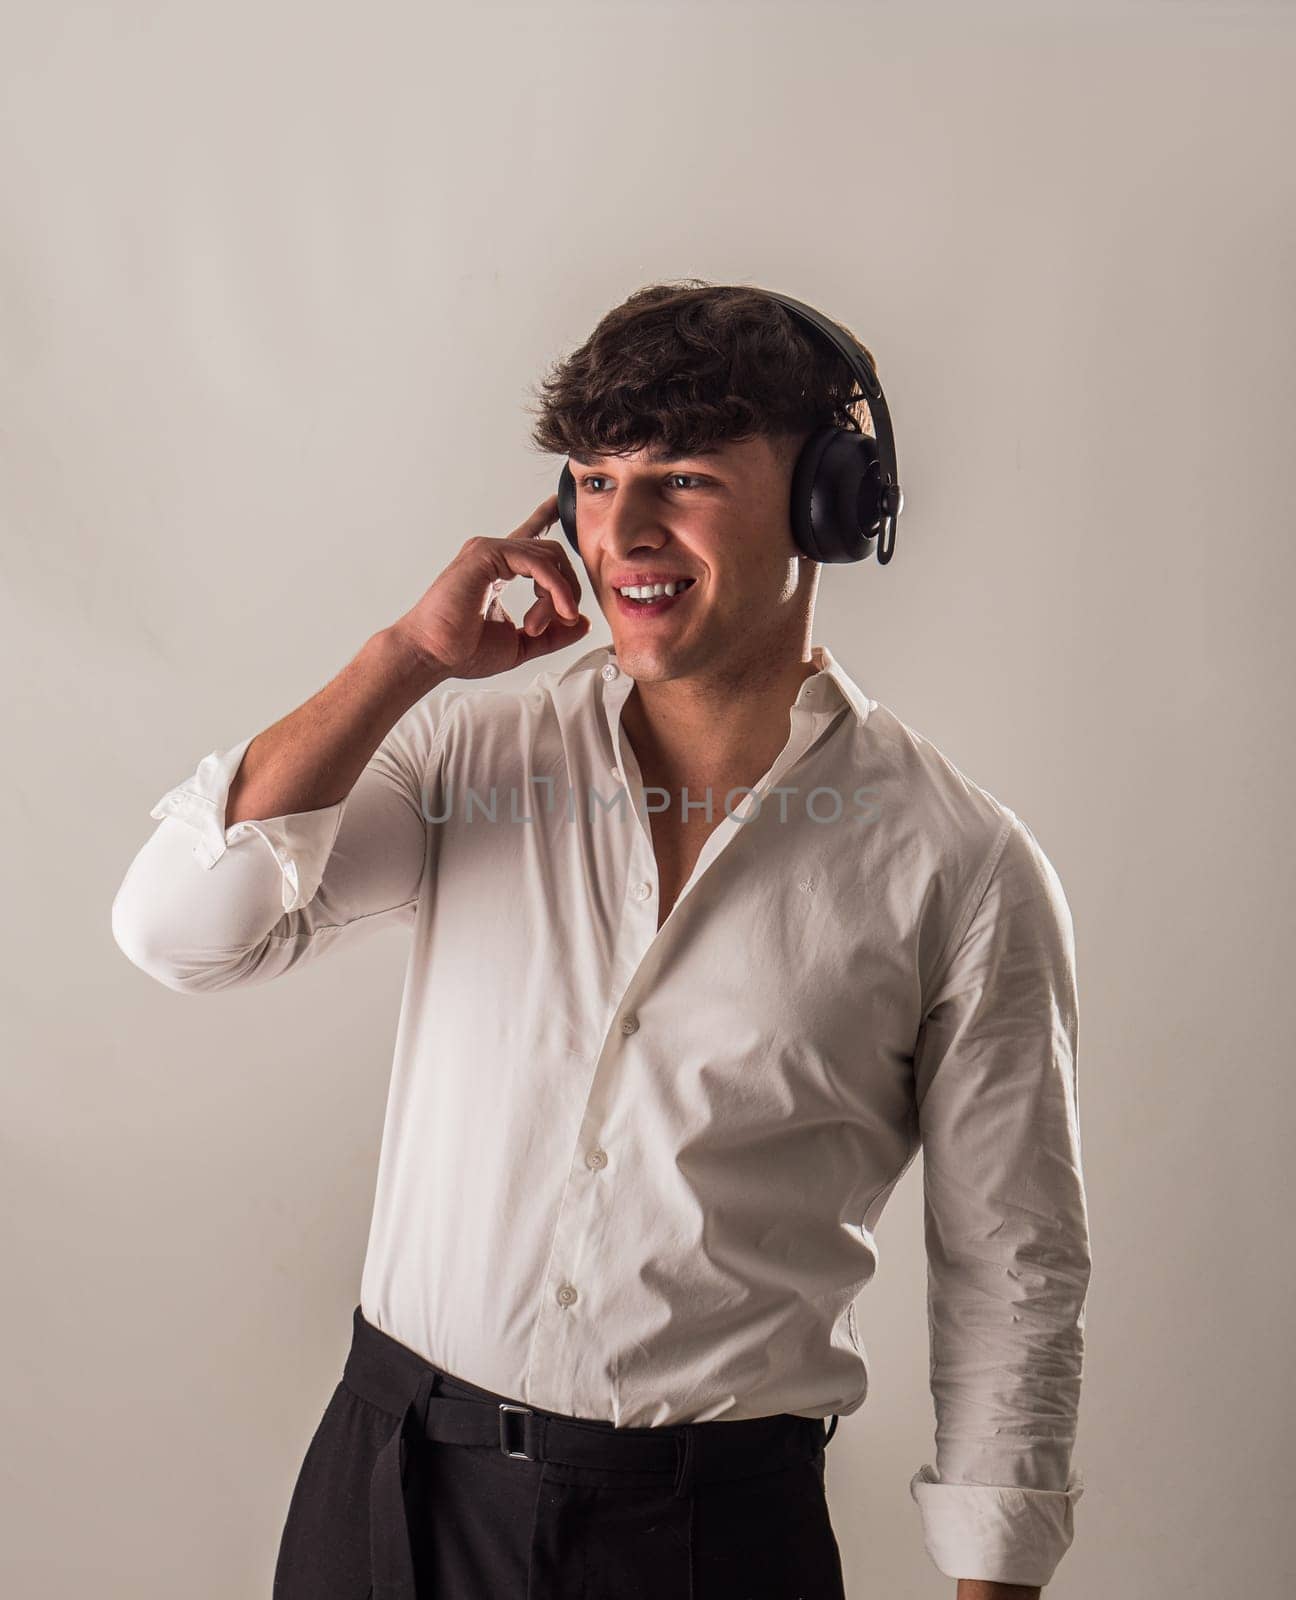 A young man is listening to music on headphones by artofphoto